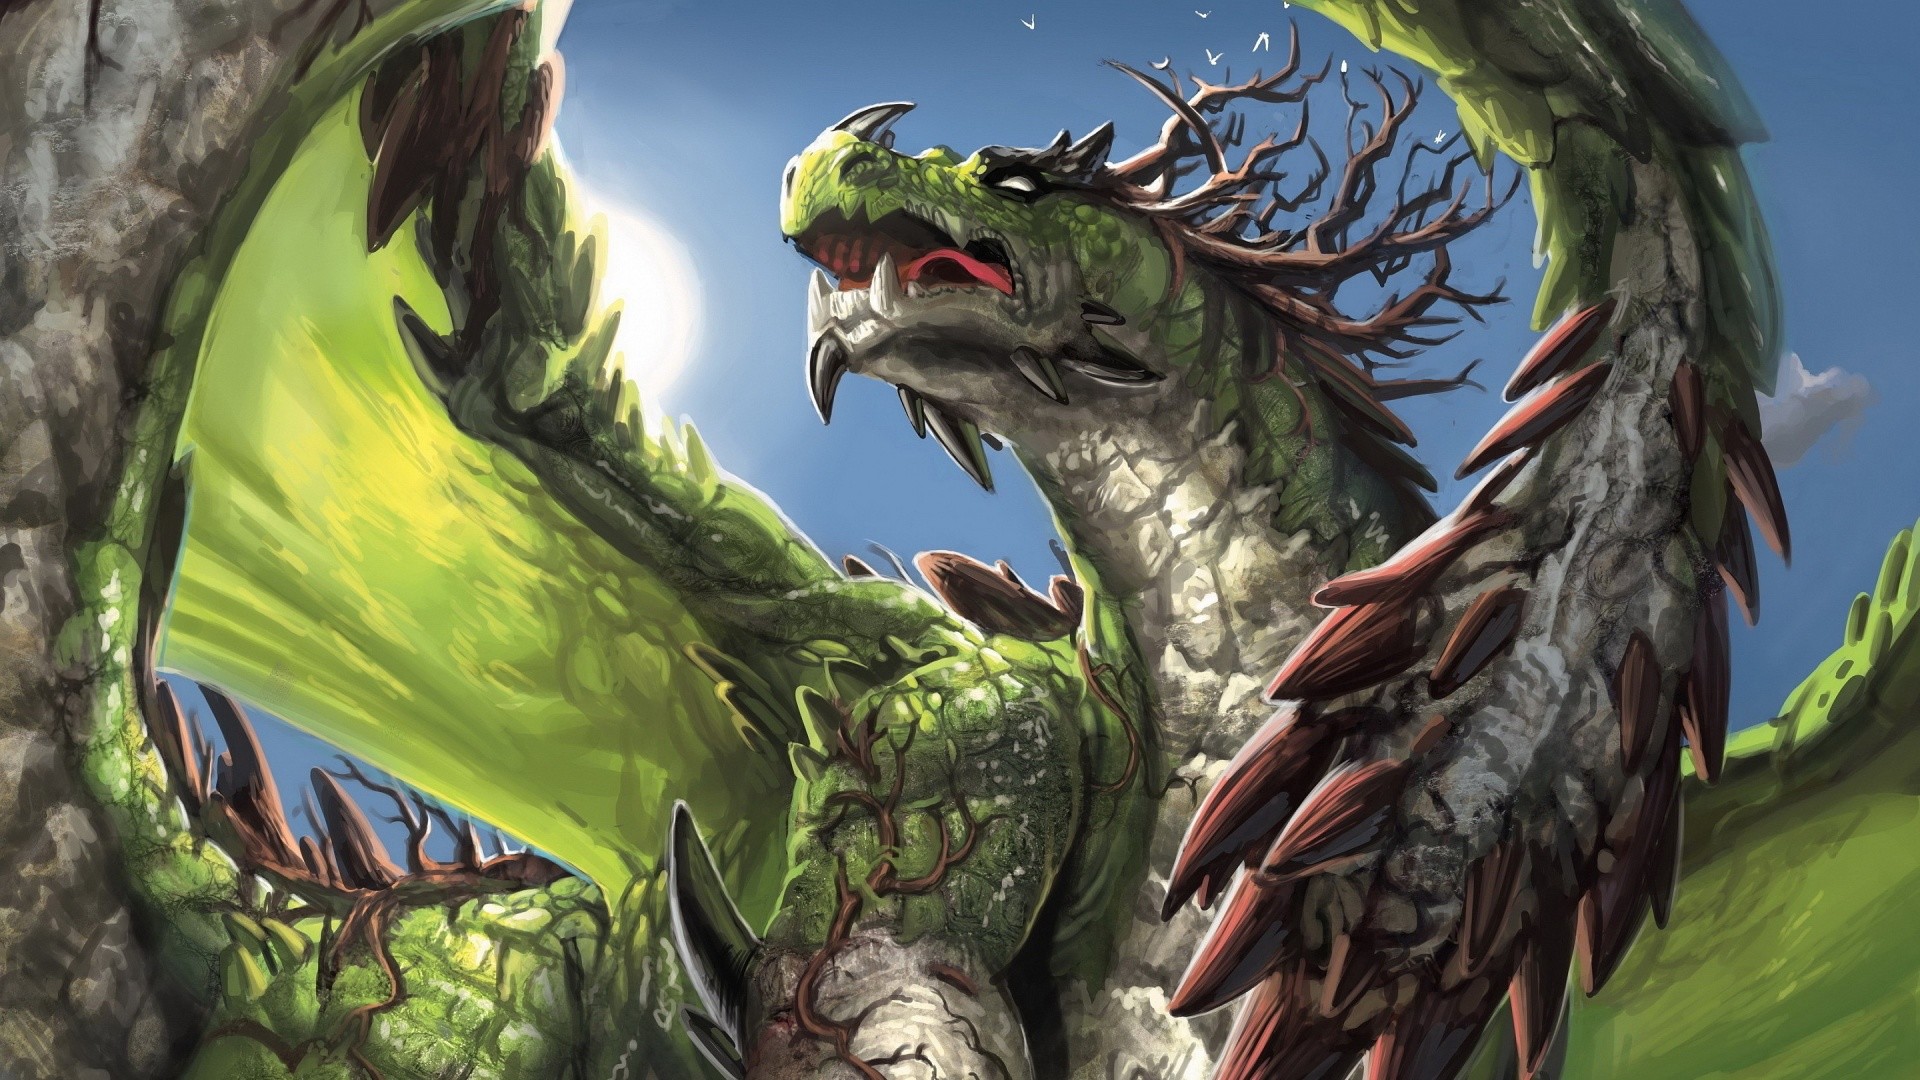 1920x1080 Forest Dragon - Western Dragon - I like the contrasting green, red and white  :